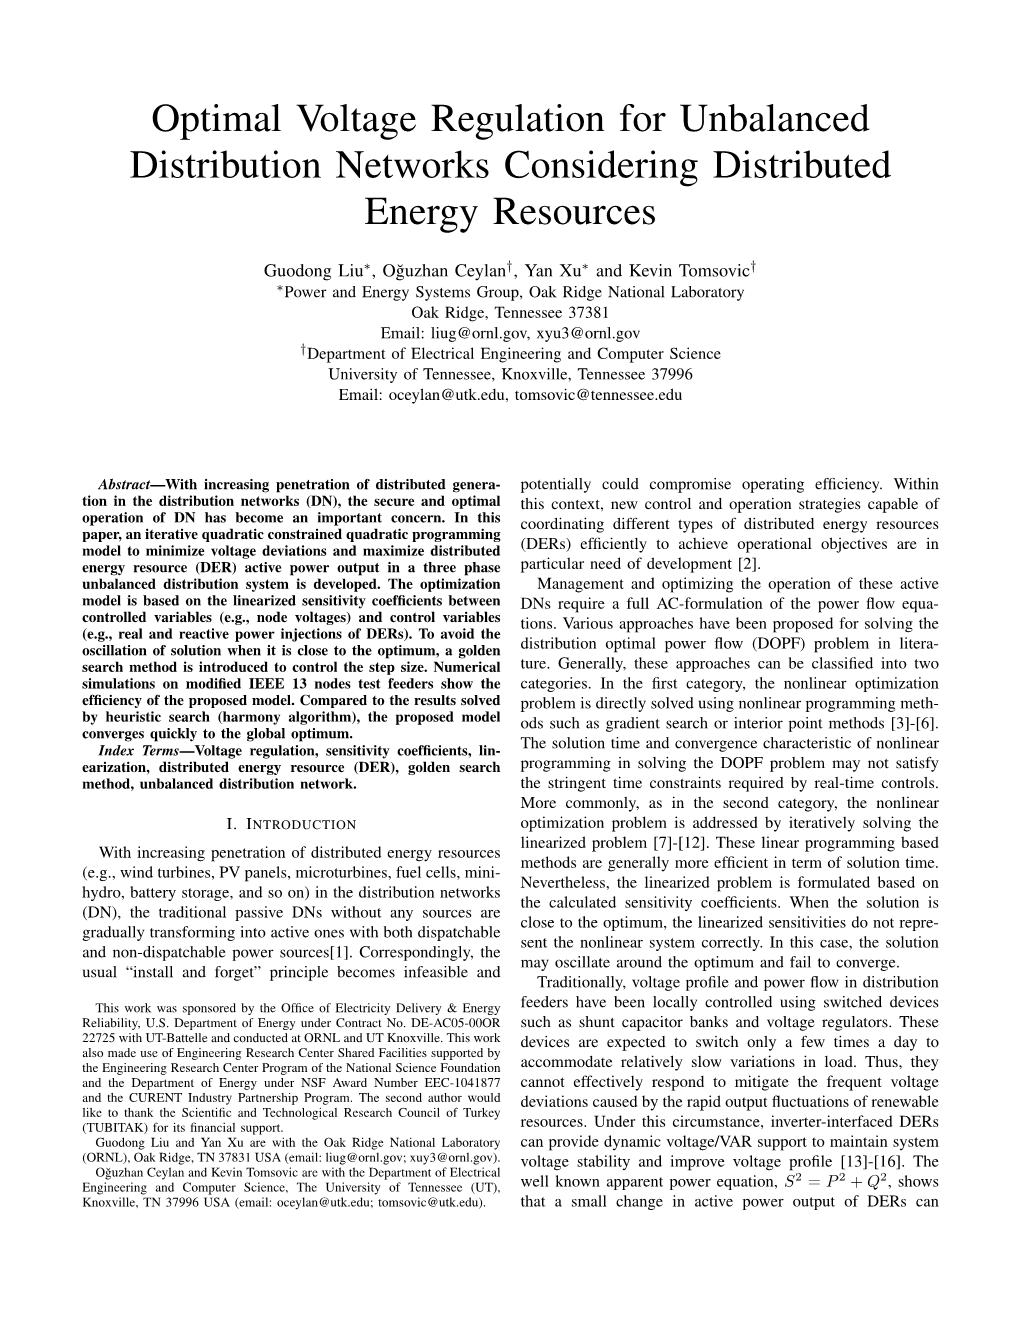 Optimal Voltage Regulation for Unbalanced Distribution Networks Considering Distributed Energy Resources